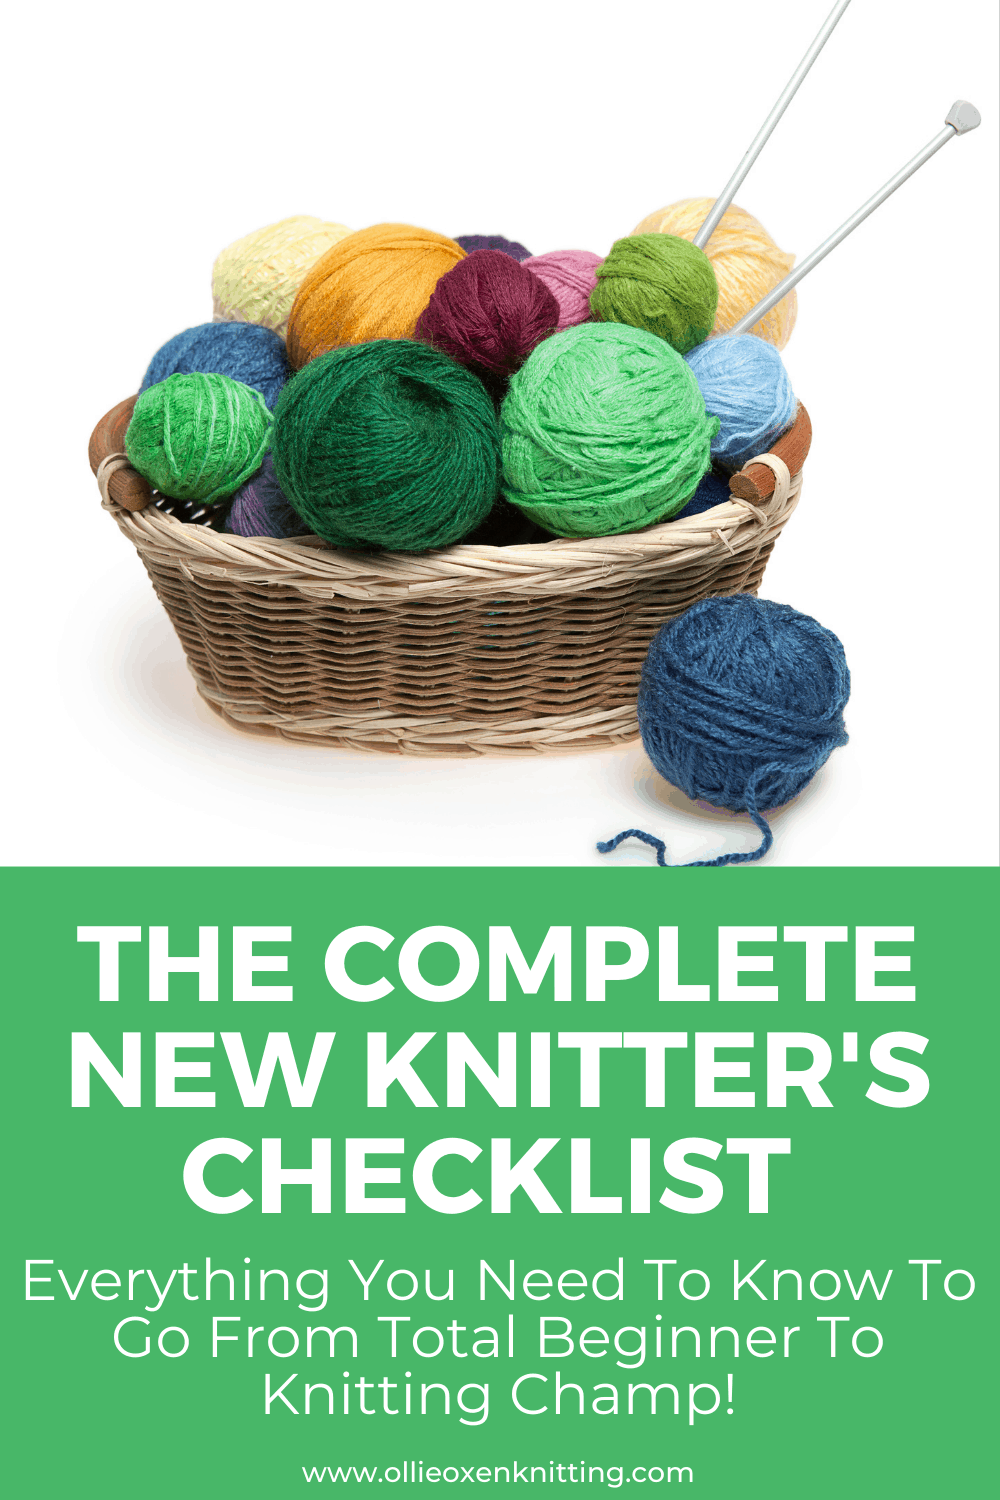 The Complete New Knitter's Checklist: Everything You Need To Know